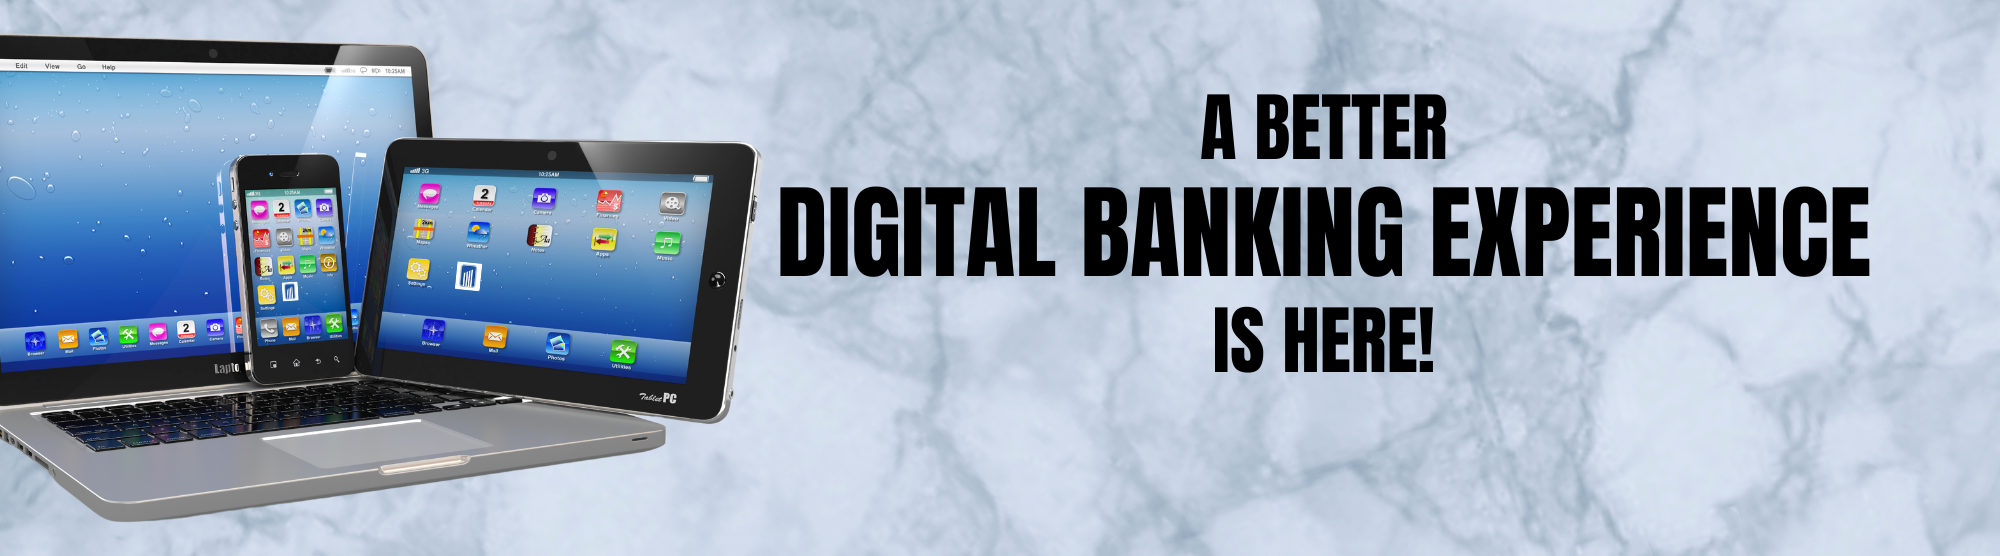 A better digital banking experience is here